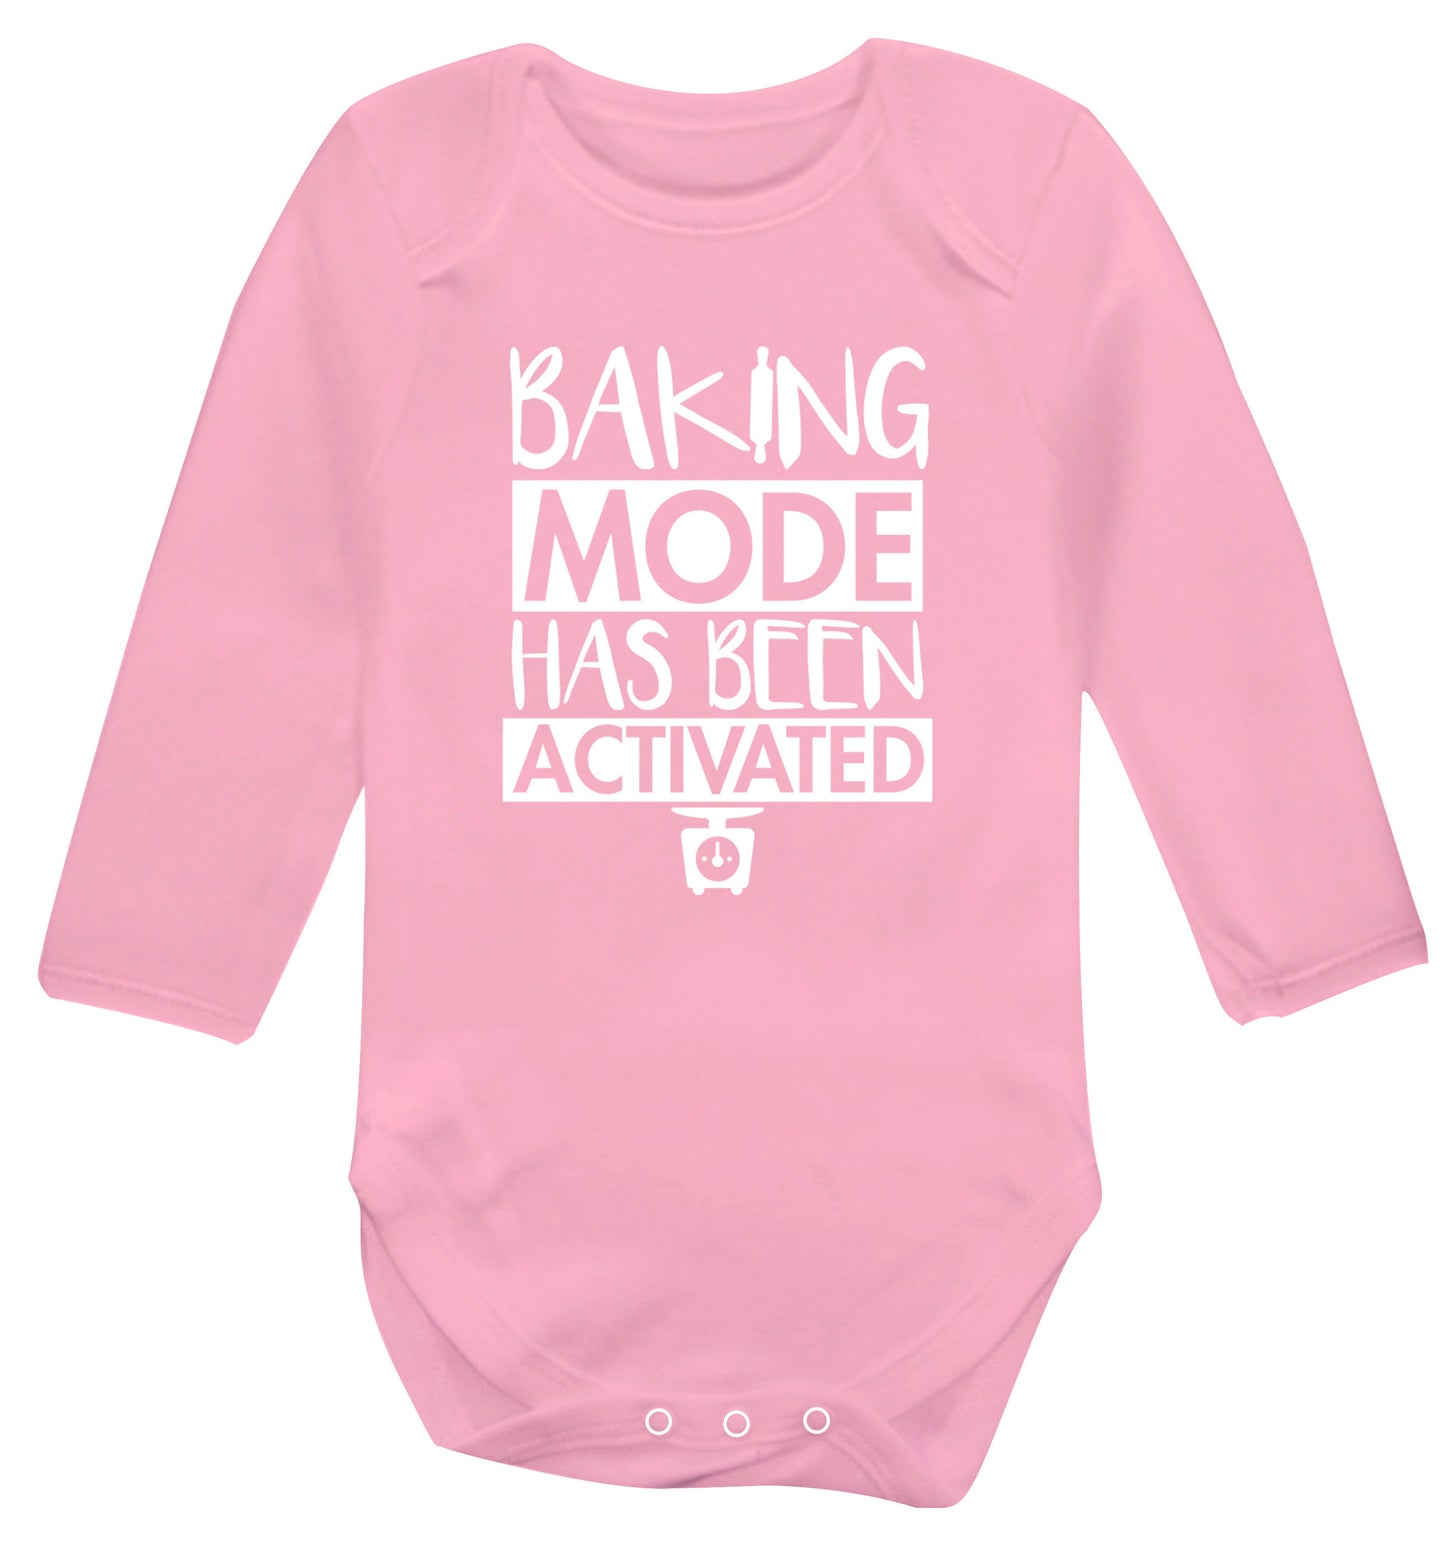 Baking mode has been activated Baby Vest long sleeved pale pink 6-12 months